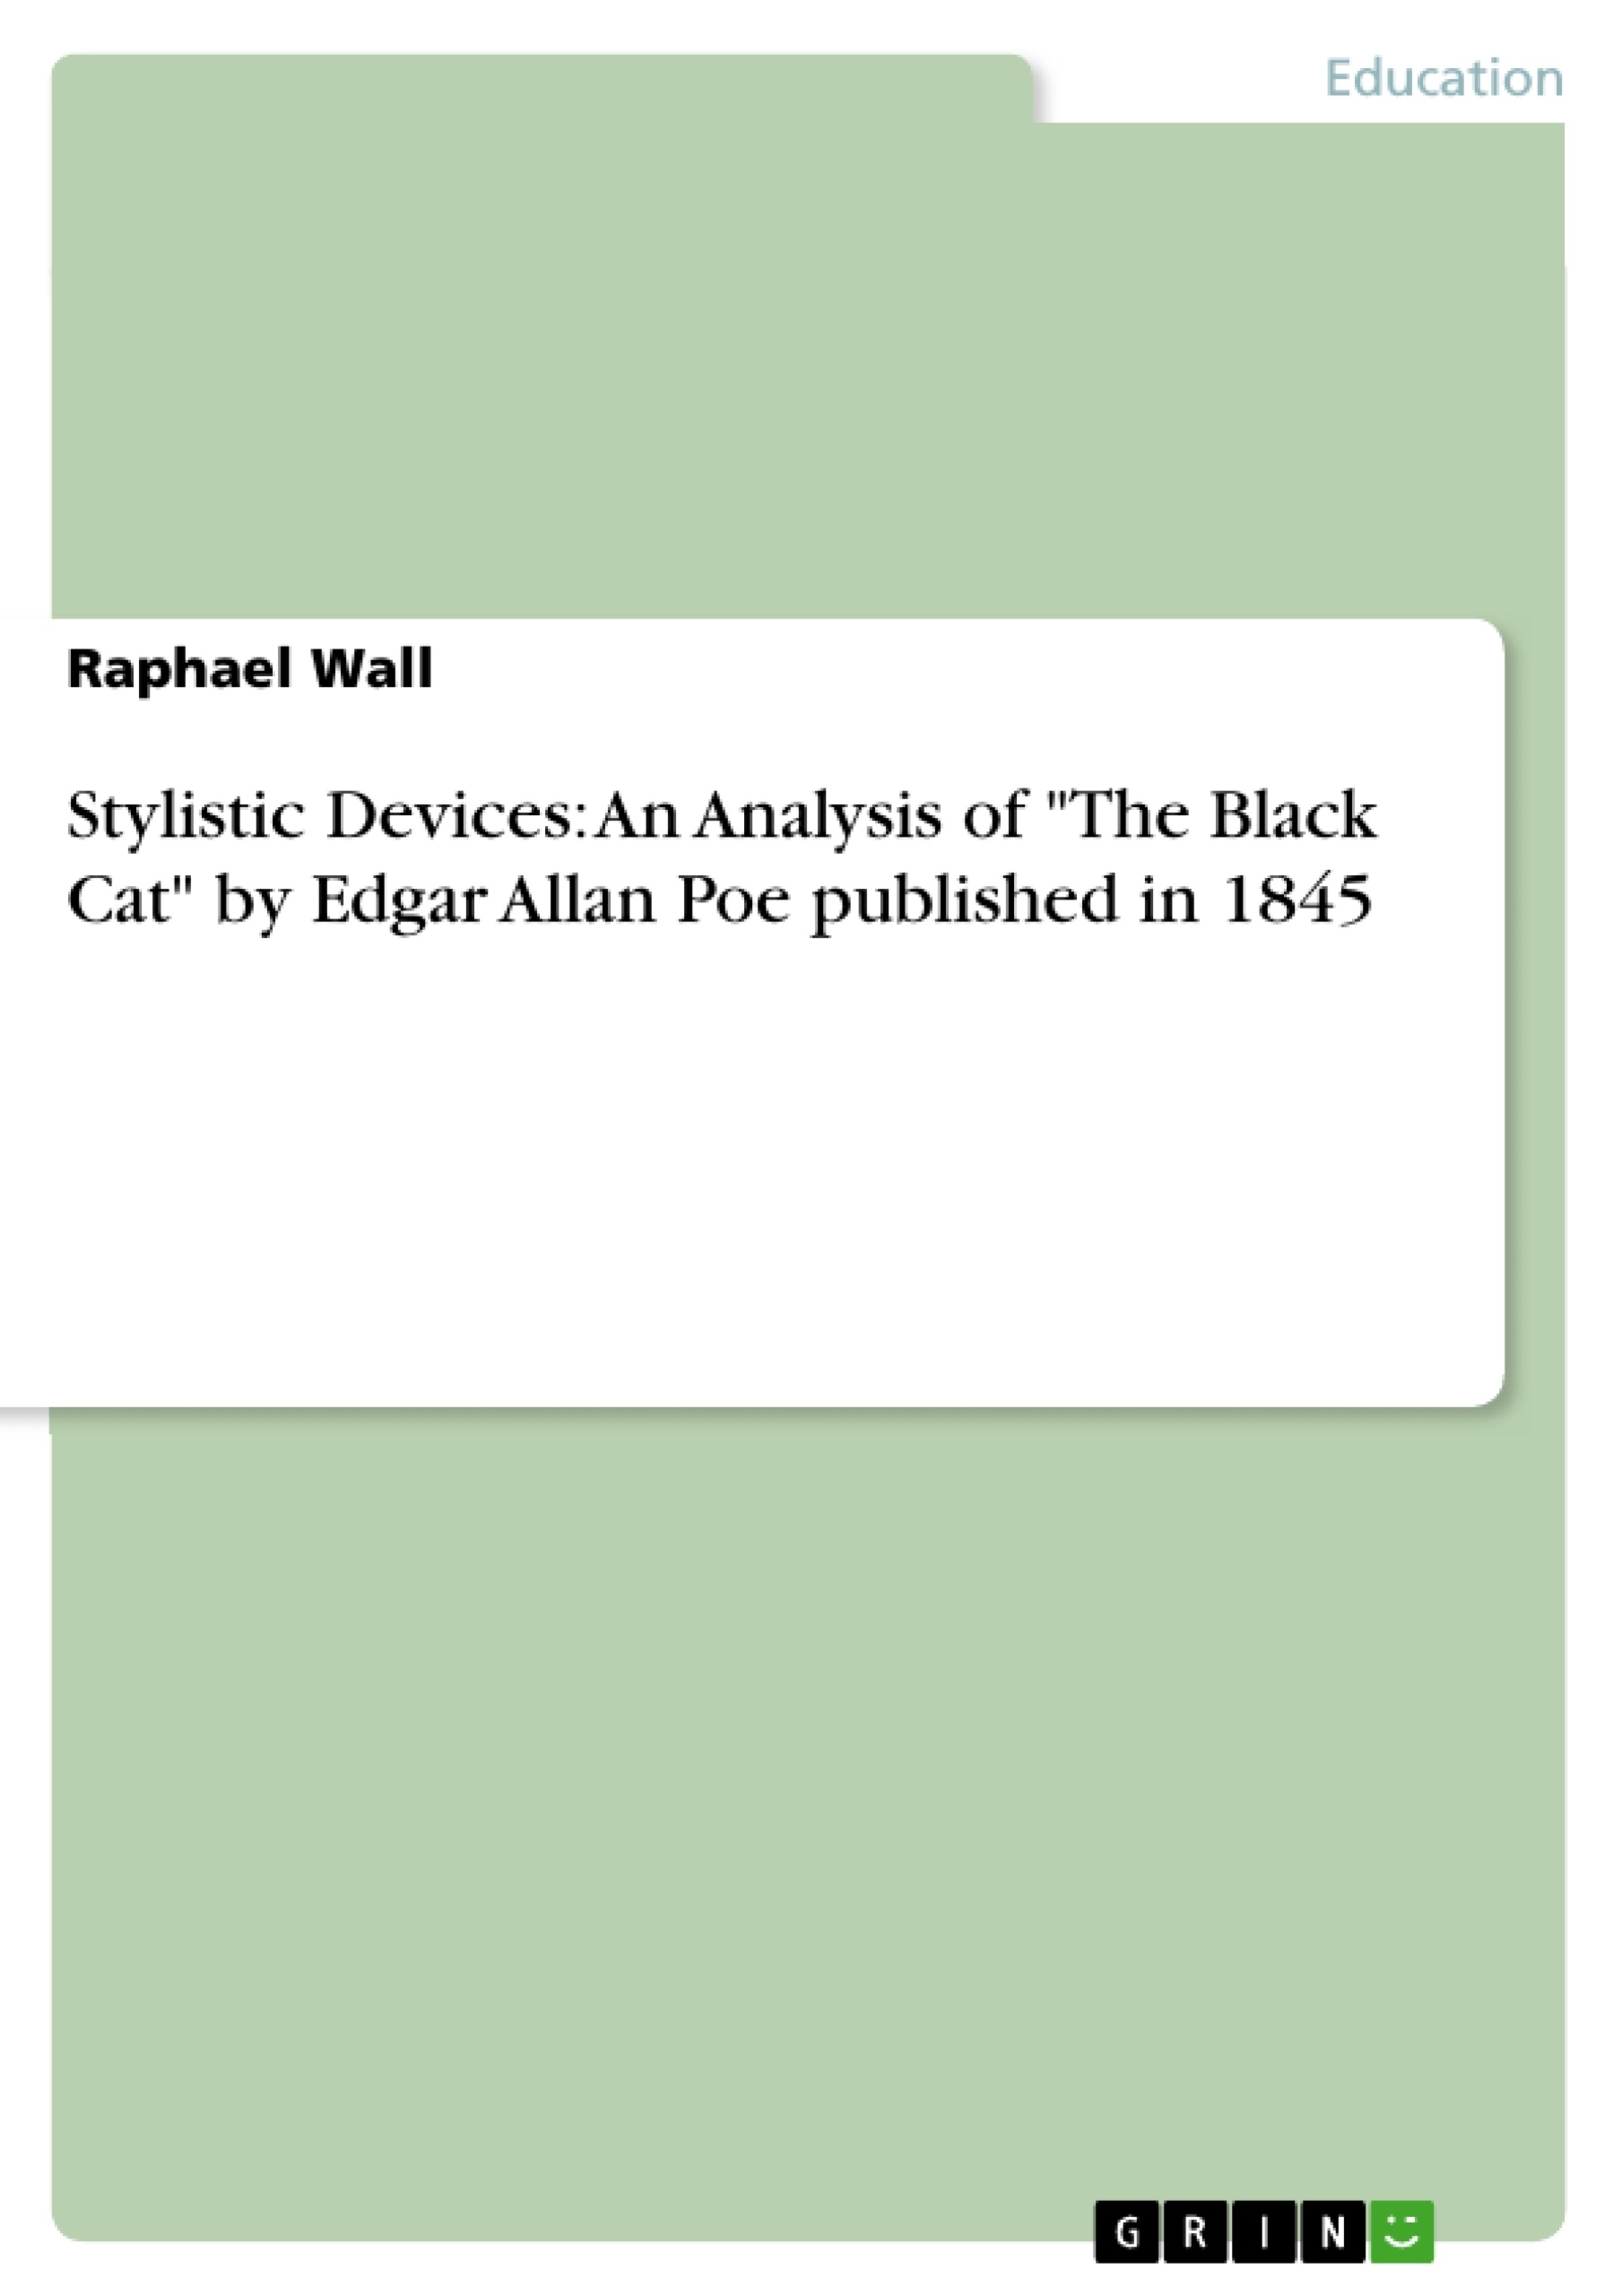 Titel: Stylistic Devices: An Analysis of "The Black Cat" by Edgar Allan Poe published in 1845